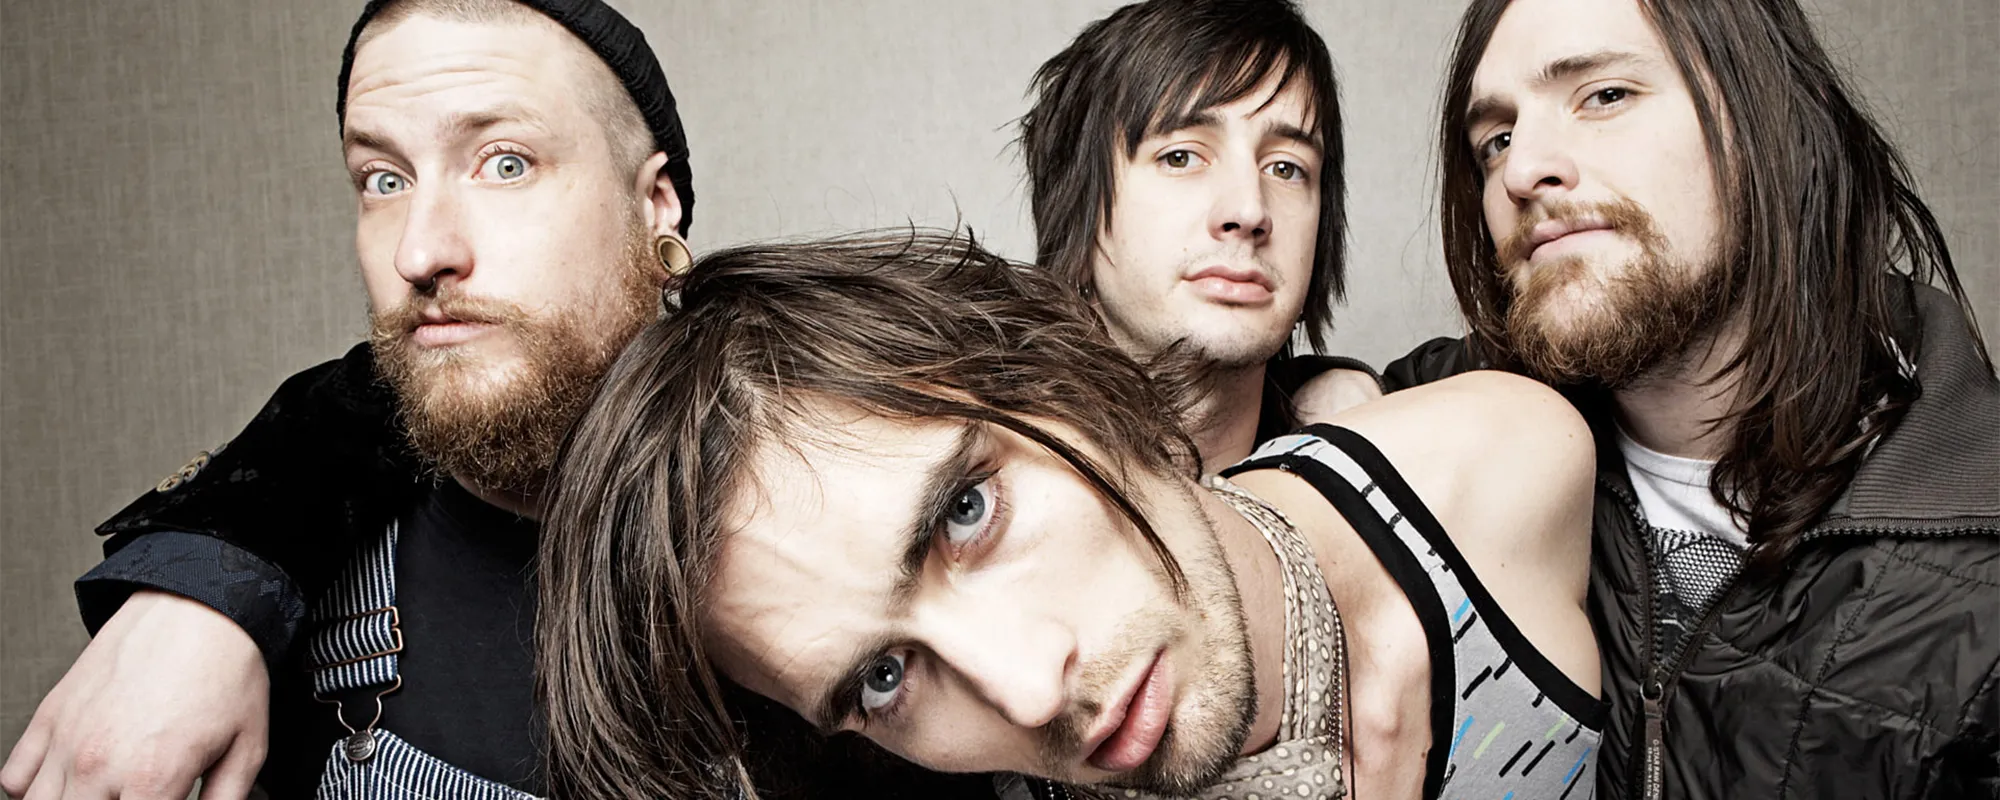 Meaning Behind the Band Name: The All-American Rejects